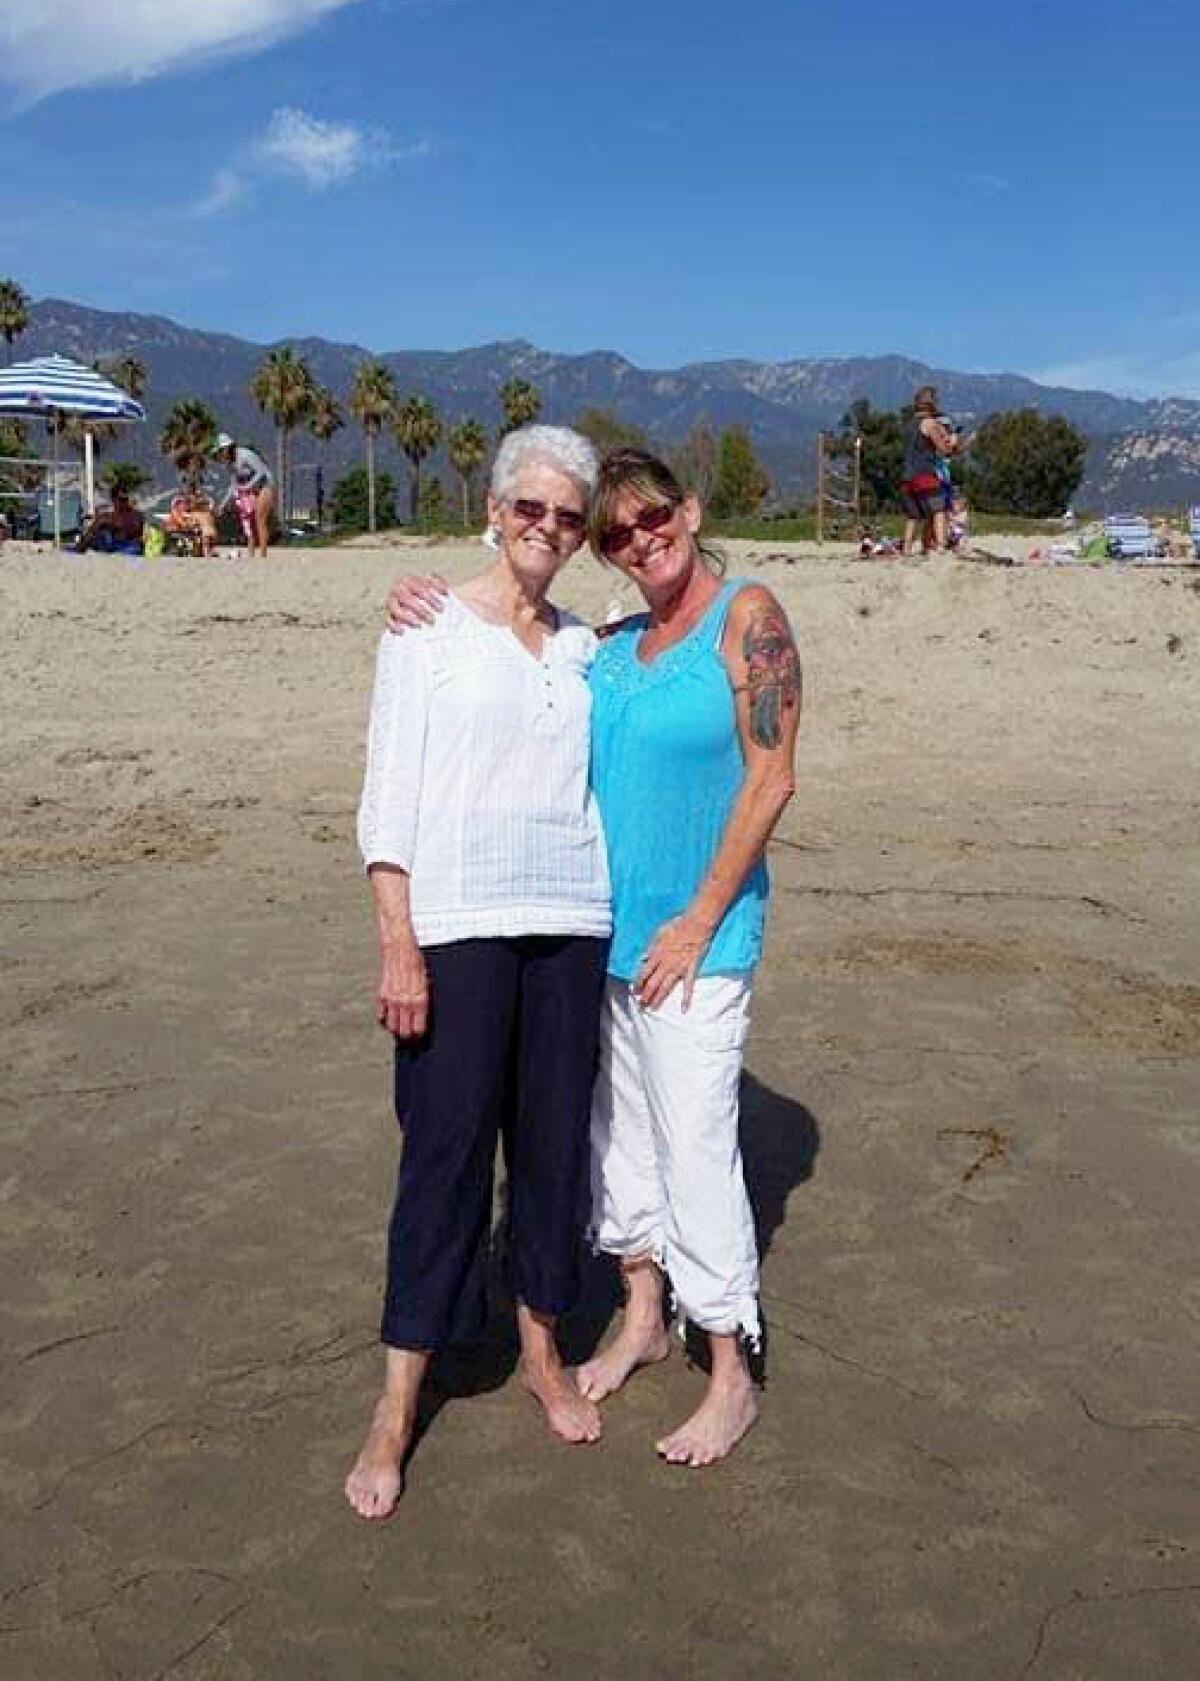 Two women press their heads together and wrap arms around each other while posing for the camera standing on a beach.